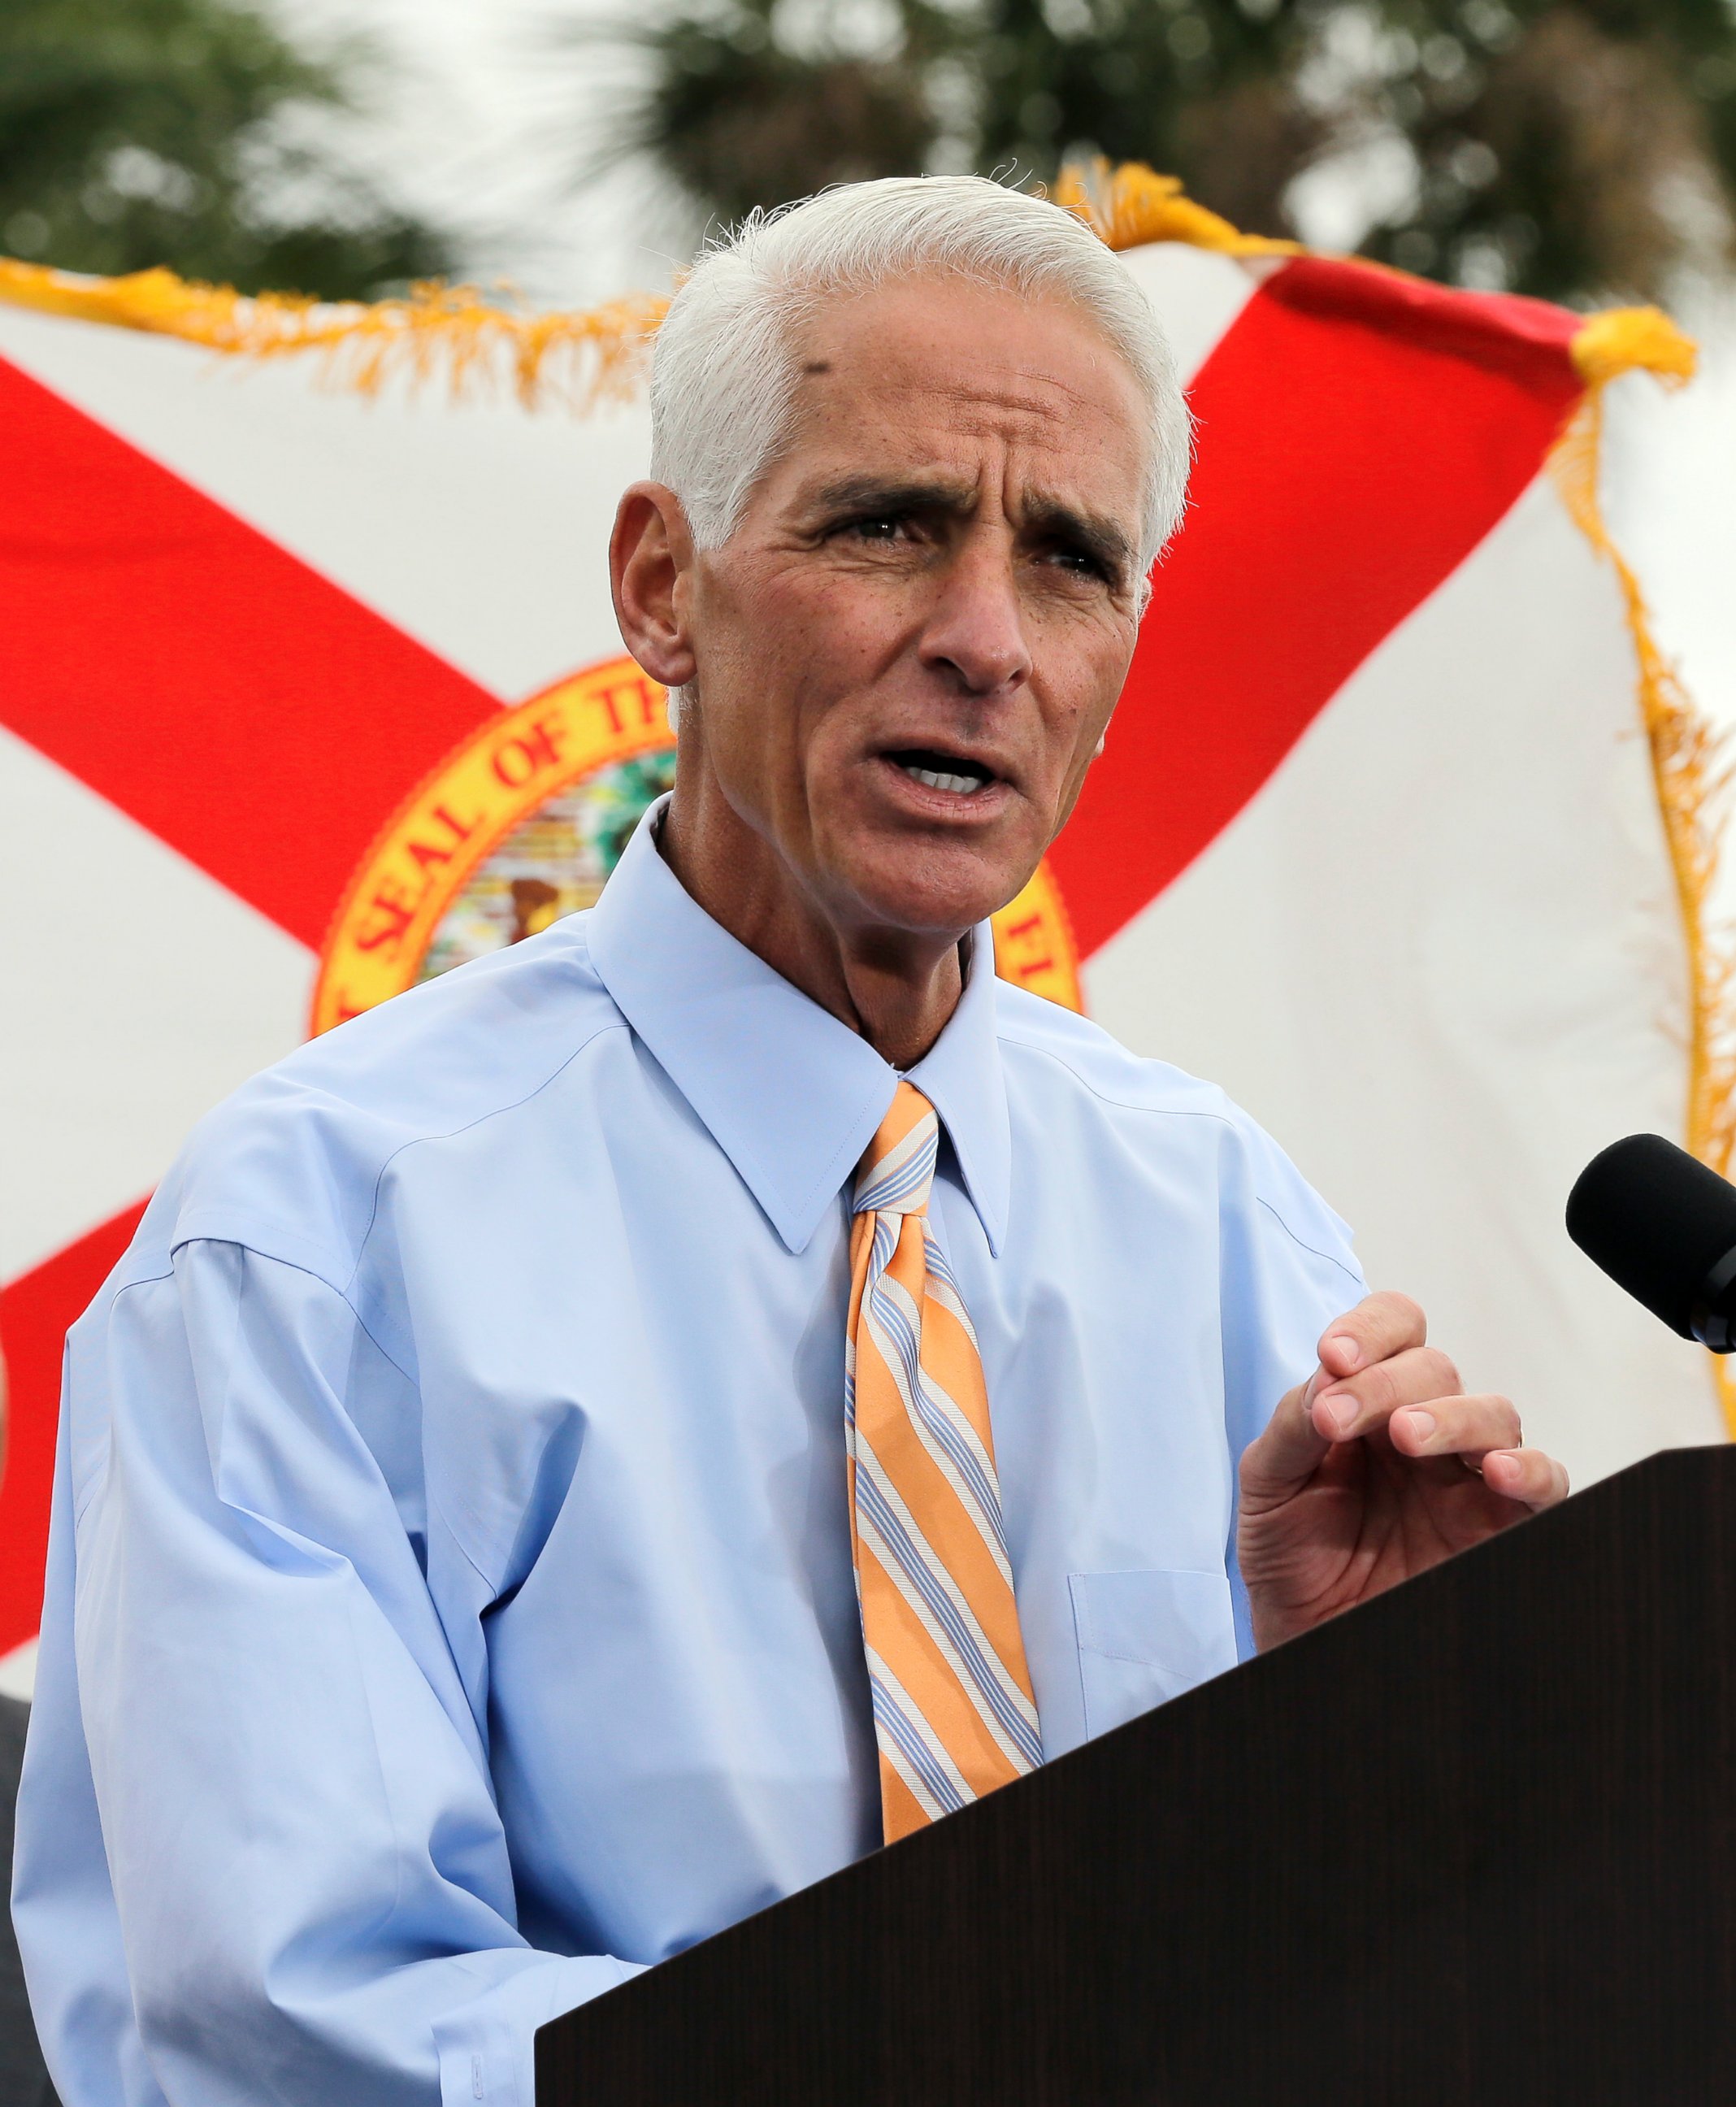 PHOTO: Former Republican Florida Gov. Charlie Crist gestures during a campaign rally, Nov. 4, 2013, in St. Petersburg, Fla.